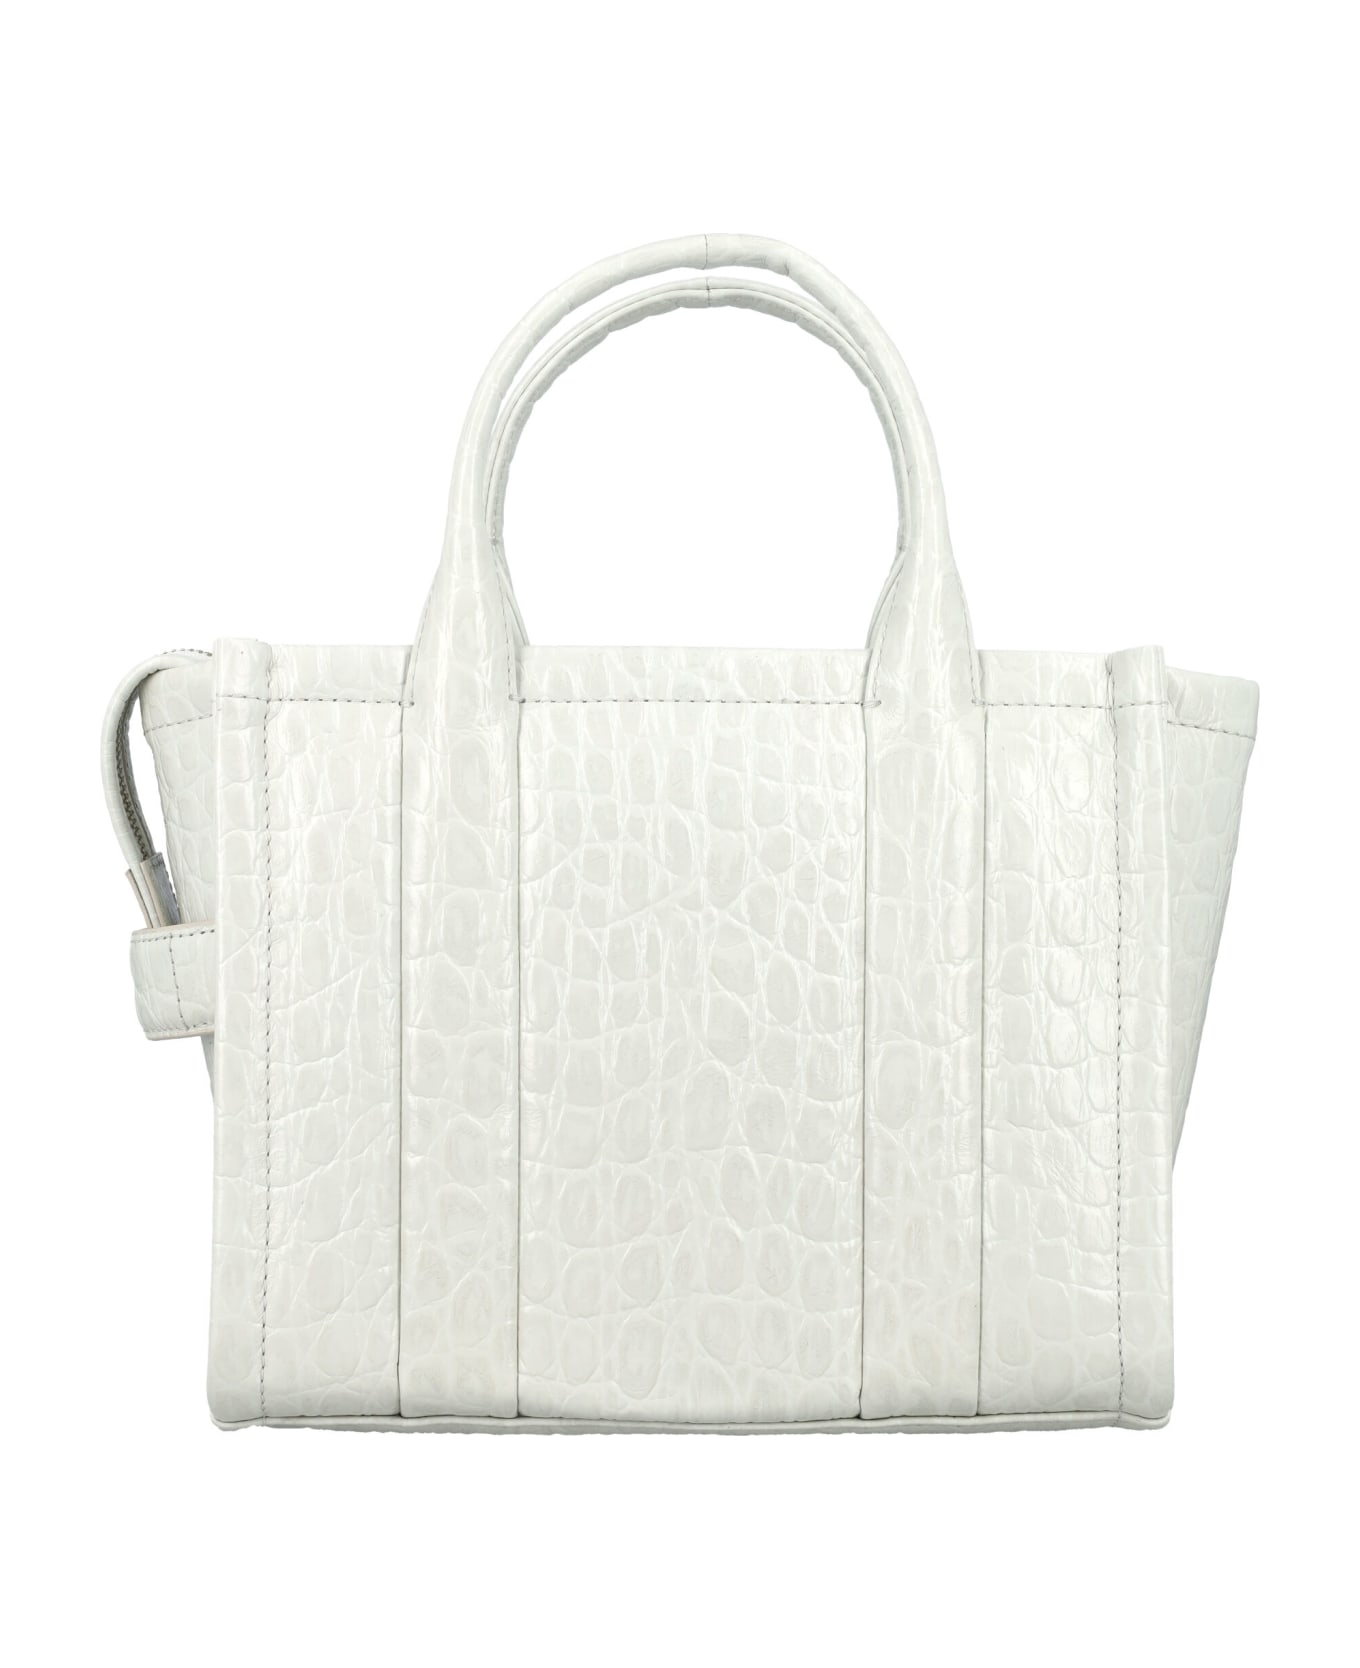 Marc Jacobs The Tote Bag - IVORY トートバッグ